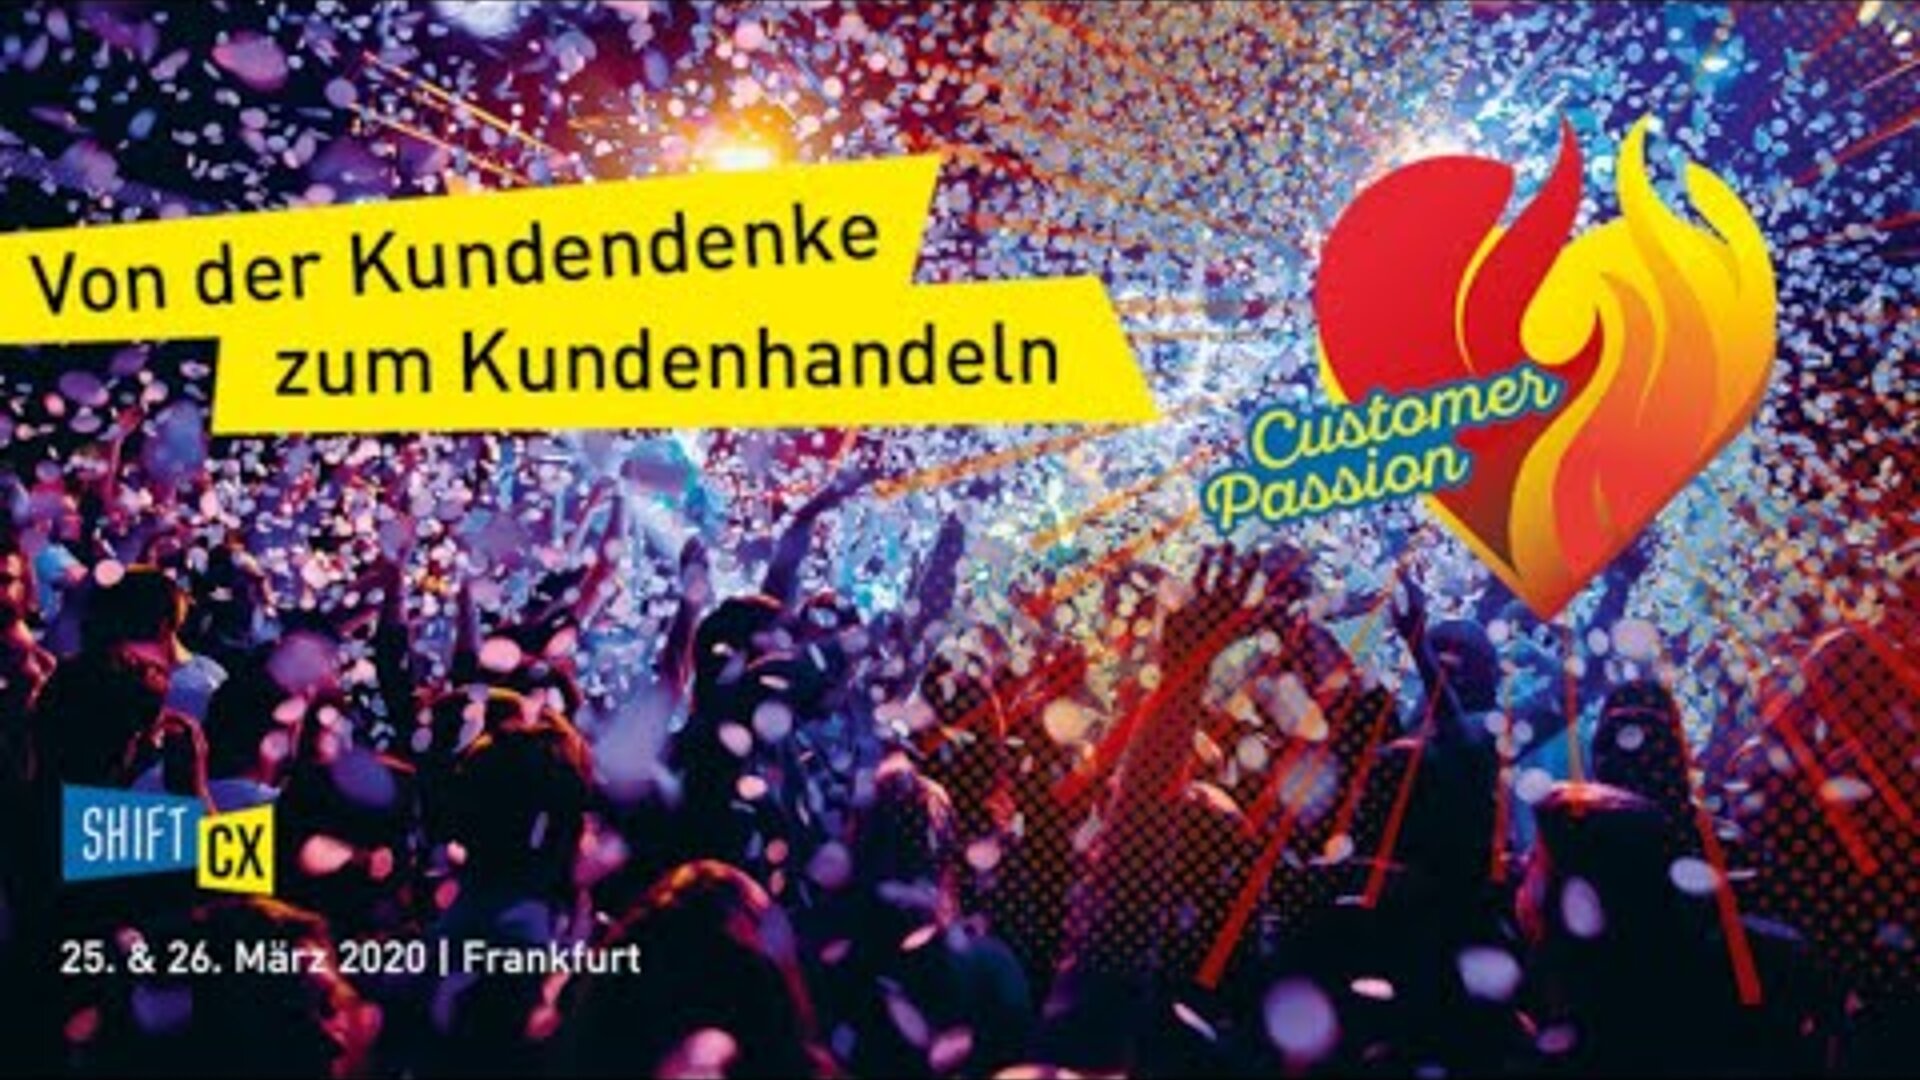 Keynote: Customer Passion as a Guiding Principle for the Omnichannel Customer Journey